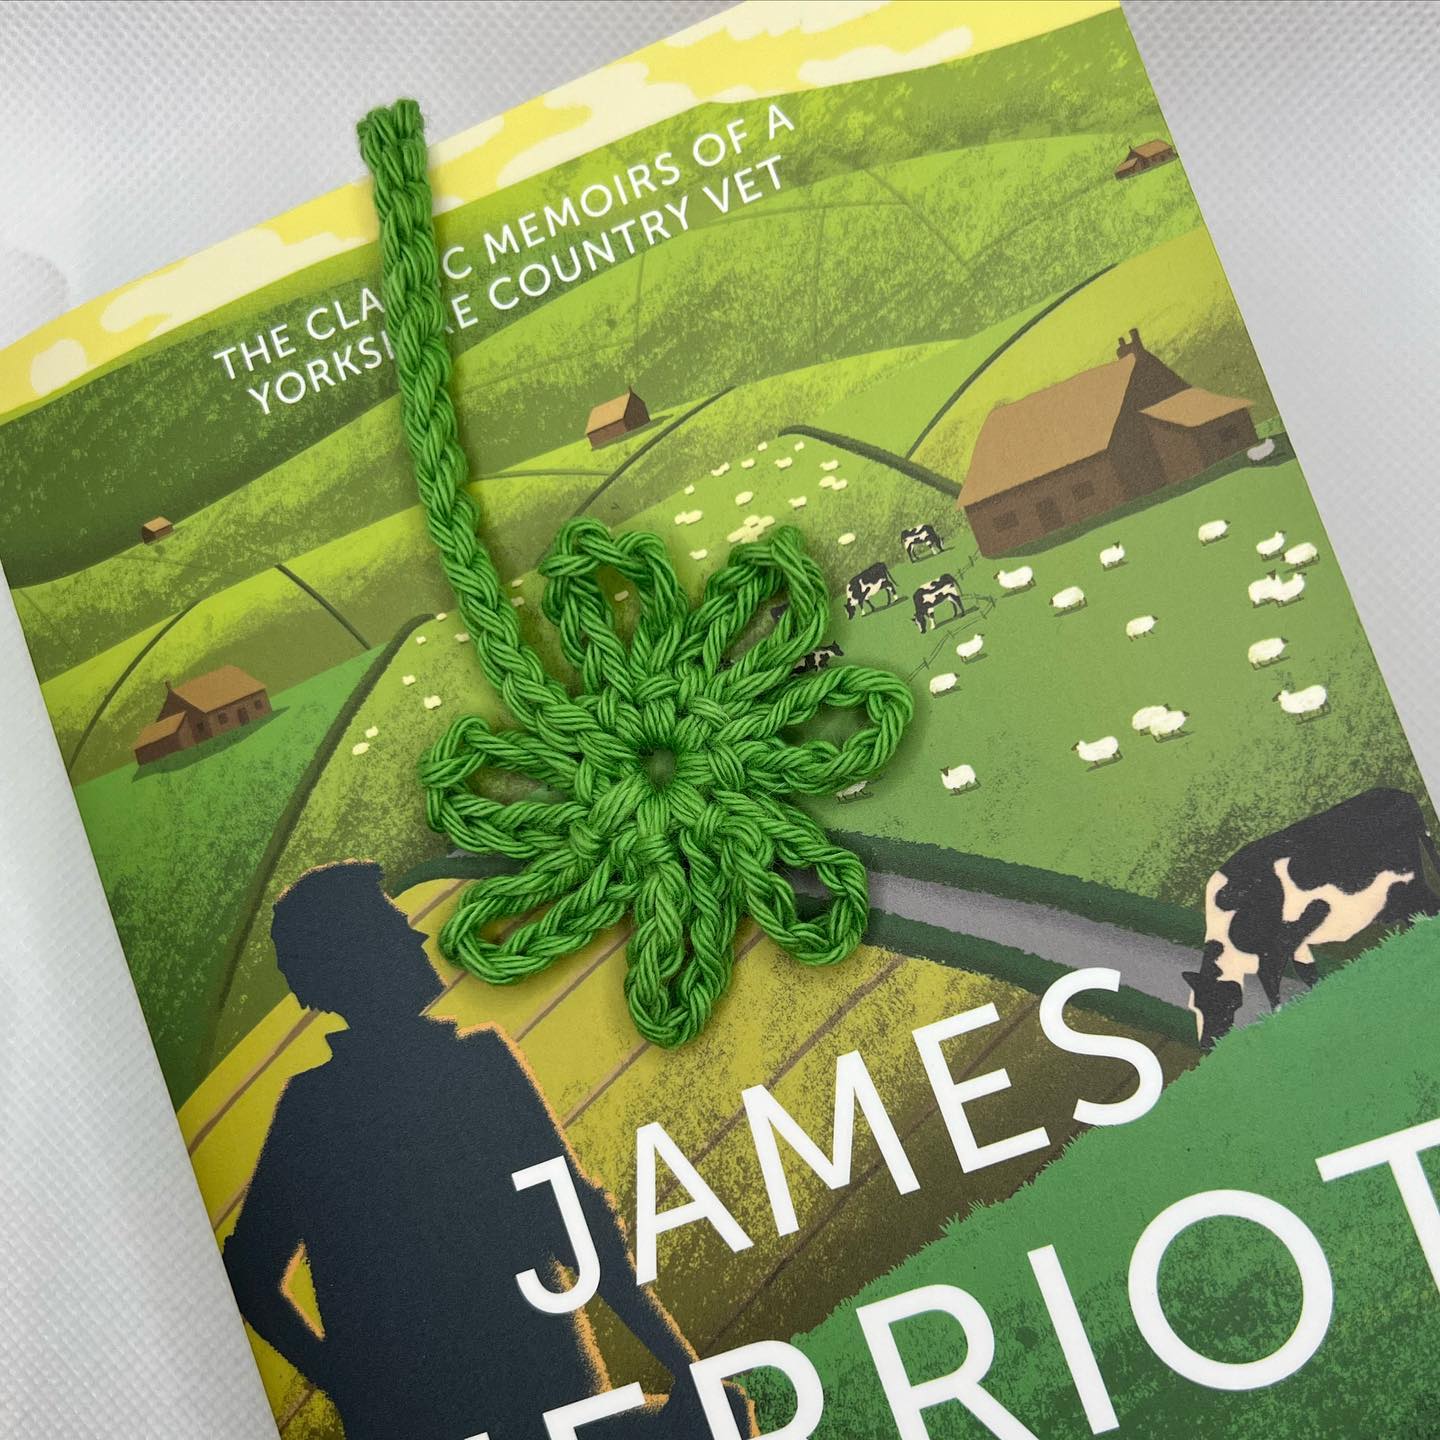 Crochet simple daisy bookmark resting on all creatures great and small by james herriot